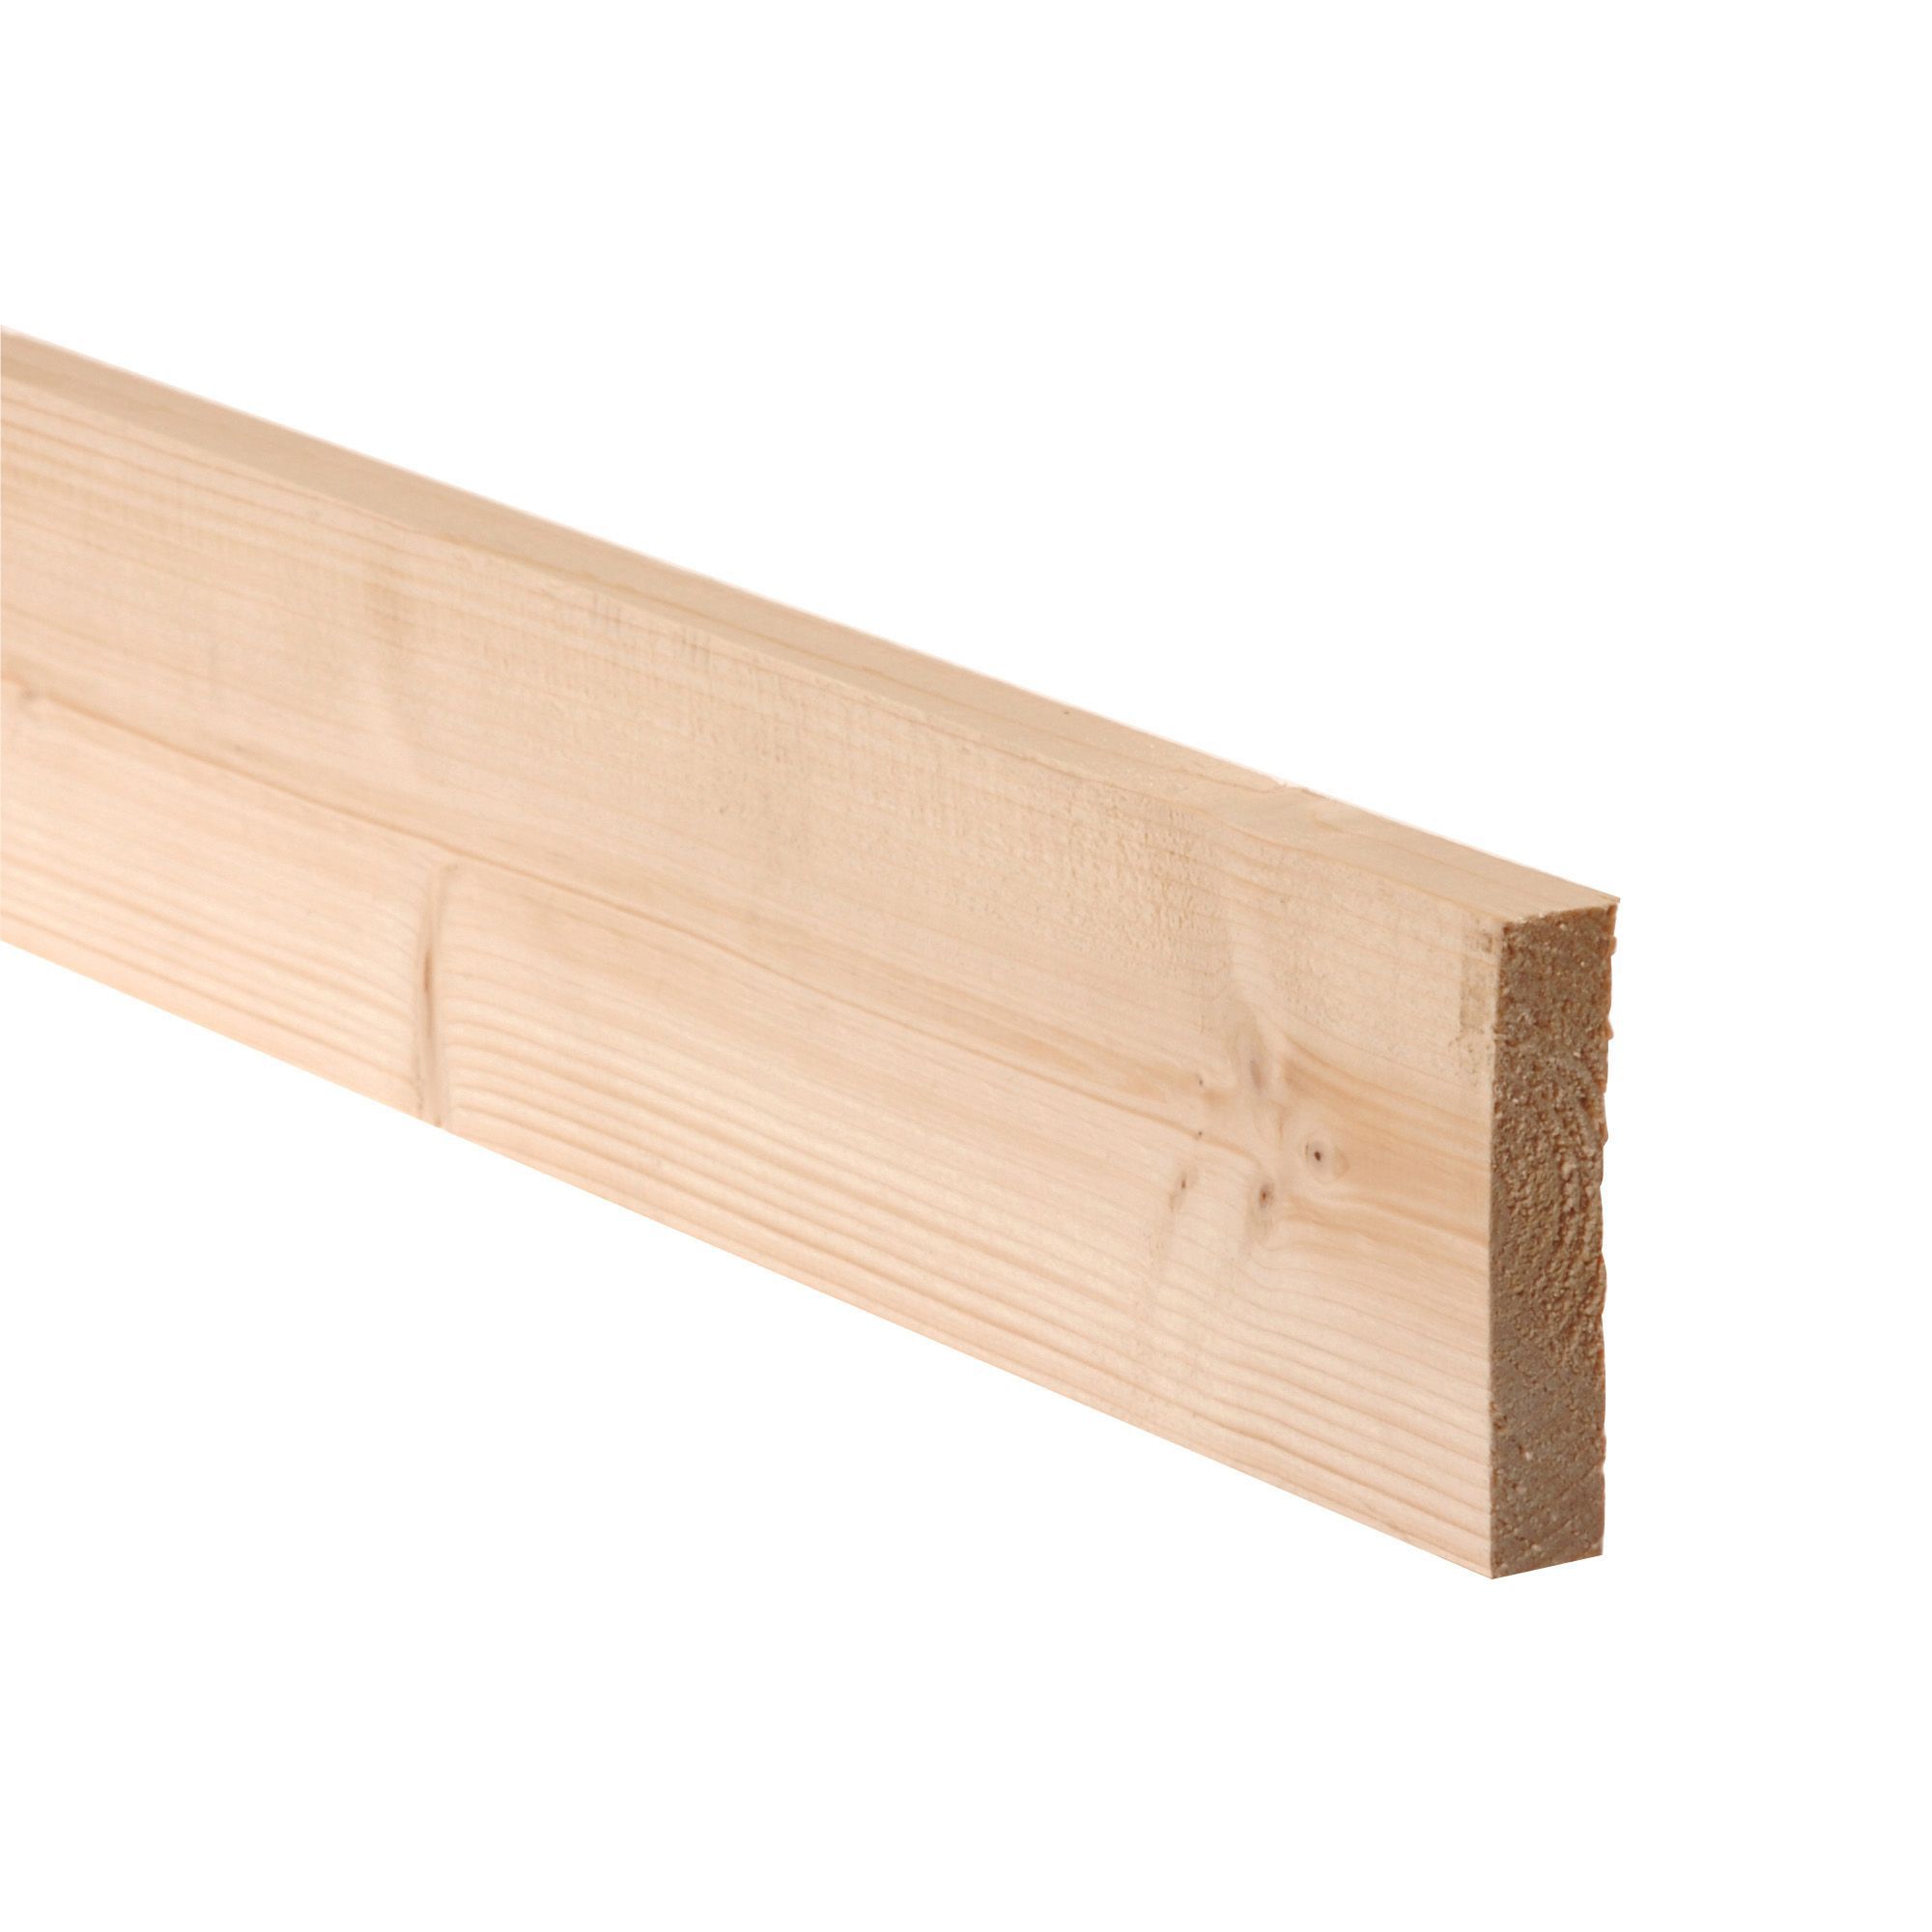 Smooth Planed Square edge Spruce Timber (L)2.4m (W)70mm (T)18mm 253241, Pack of 8